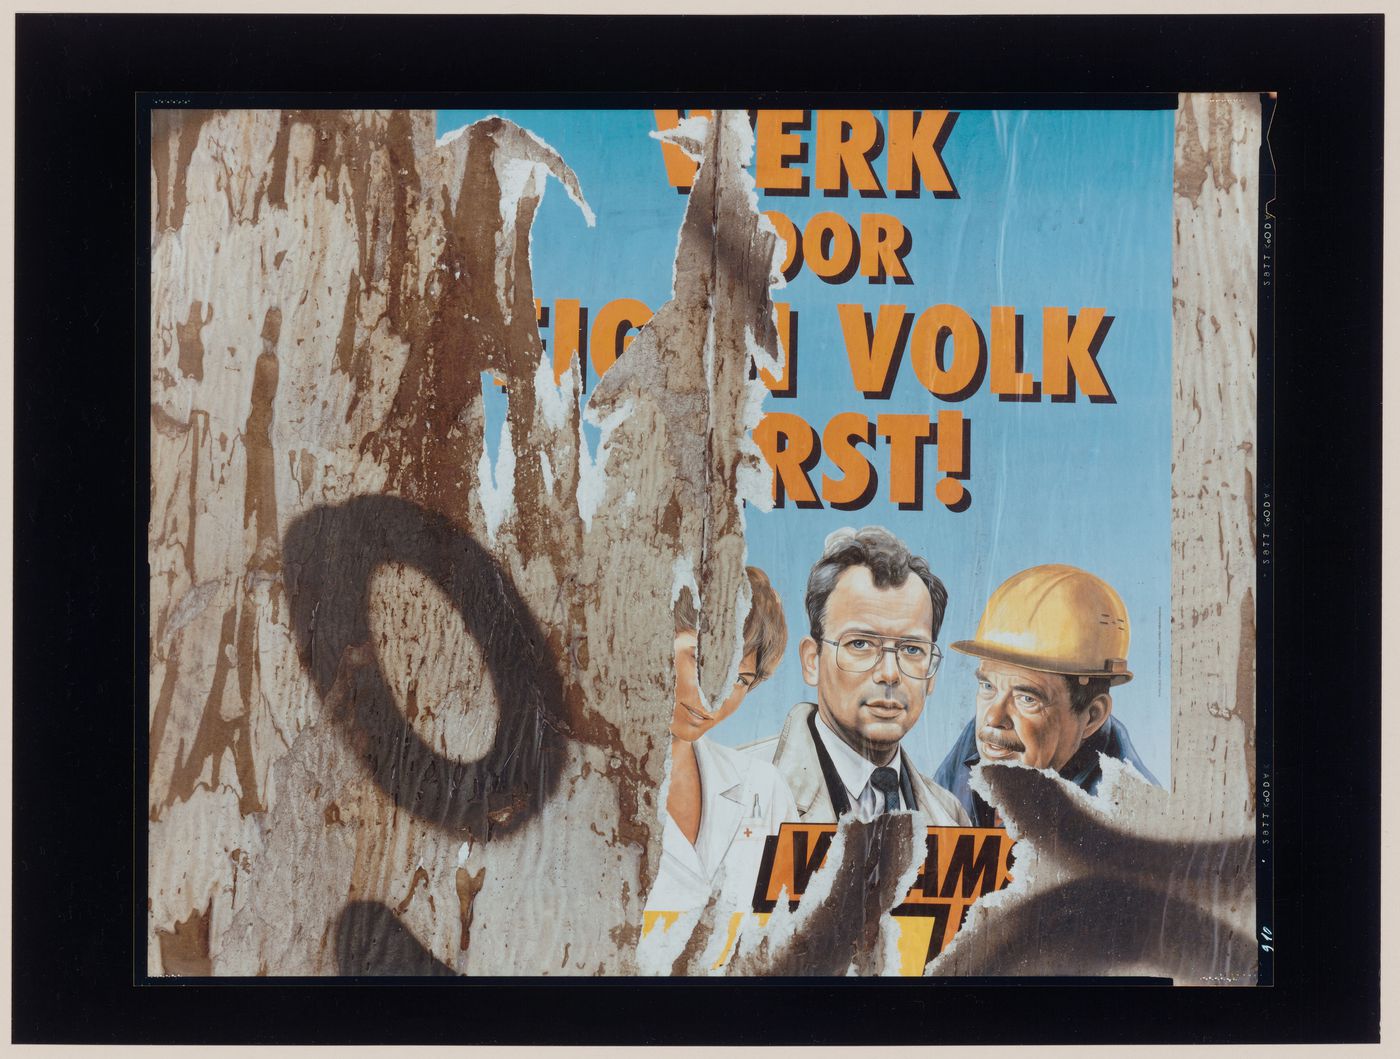 View of a wall showing a torn political poster for the Vlaams Blok, Maastricht, Limburg Province, Belgium (from the series "In between cities")